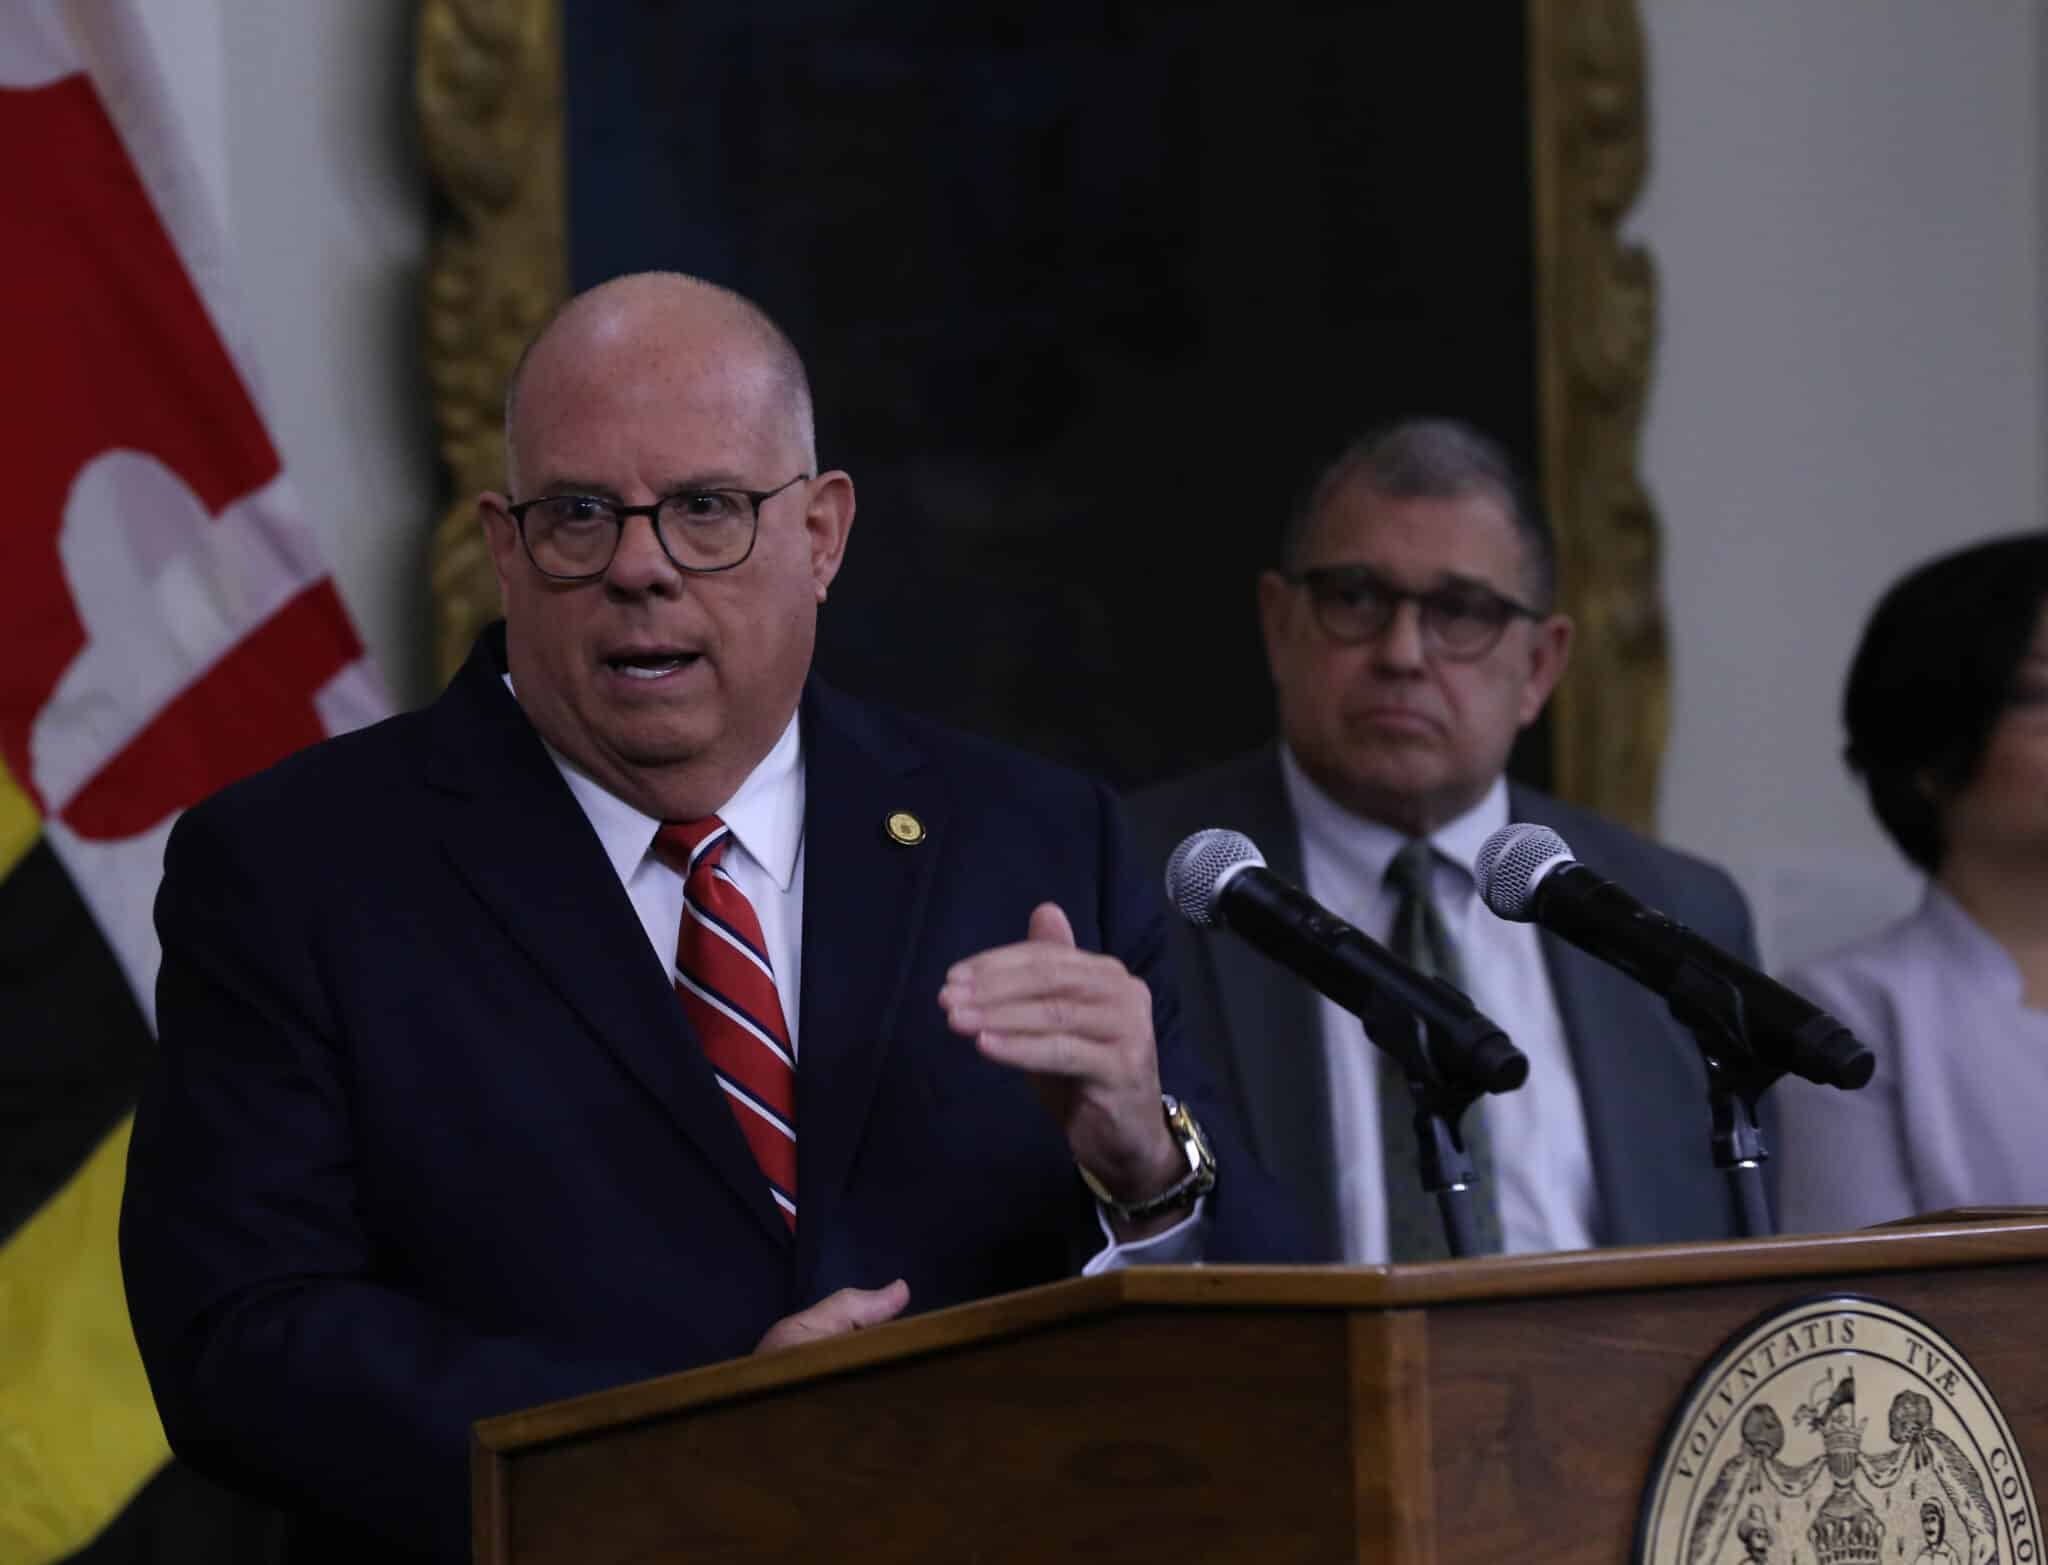 ANNAPOLIS, MARYLAND - JUNE 09: Governor Larry Hogan speaks at a press conference at Maryland State House on June 09, 2022 in Annapolis, Maryland. According to reports, three people were killed and four wounded after a gunman opened fire at the Columbia Machine manufacturing facility on June 9th in Smithsburg, Maryland. The suspect was later captured after a shootout with state troopers approximately 5 miles from the manufacturing facility. (Photo by Brian Stukes/Getty Images)